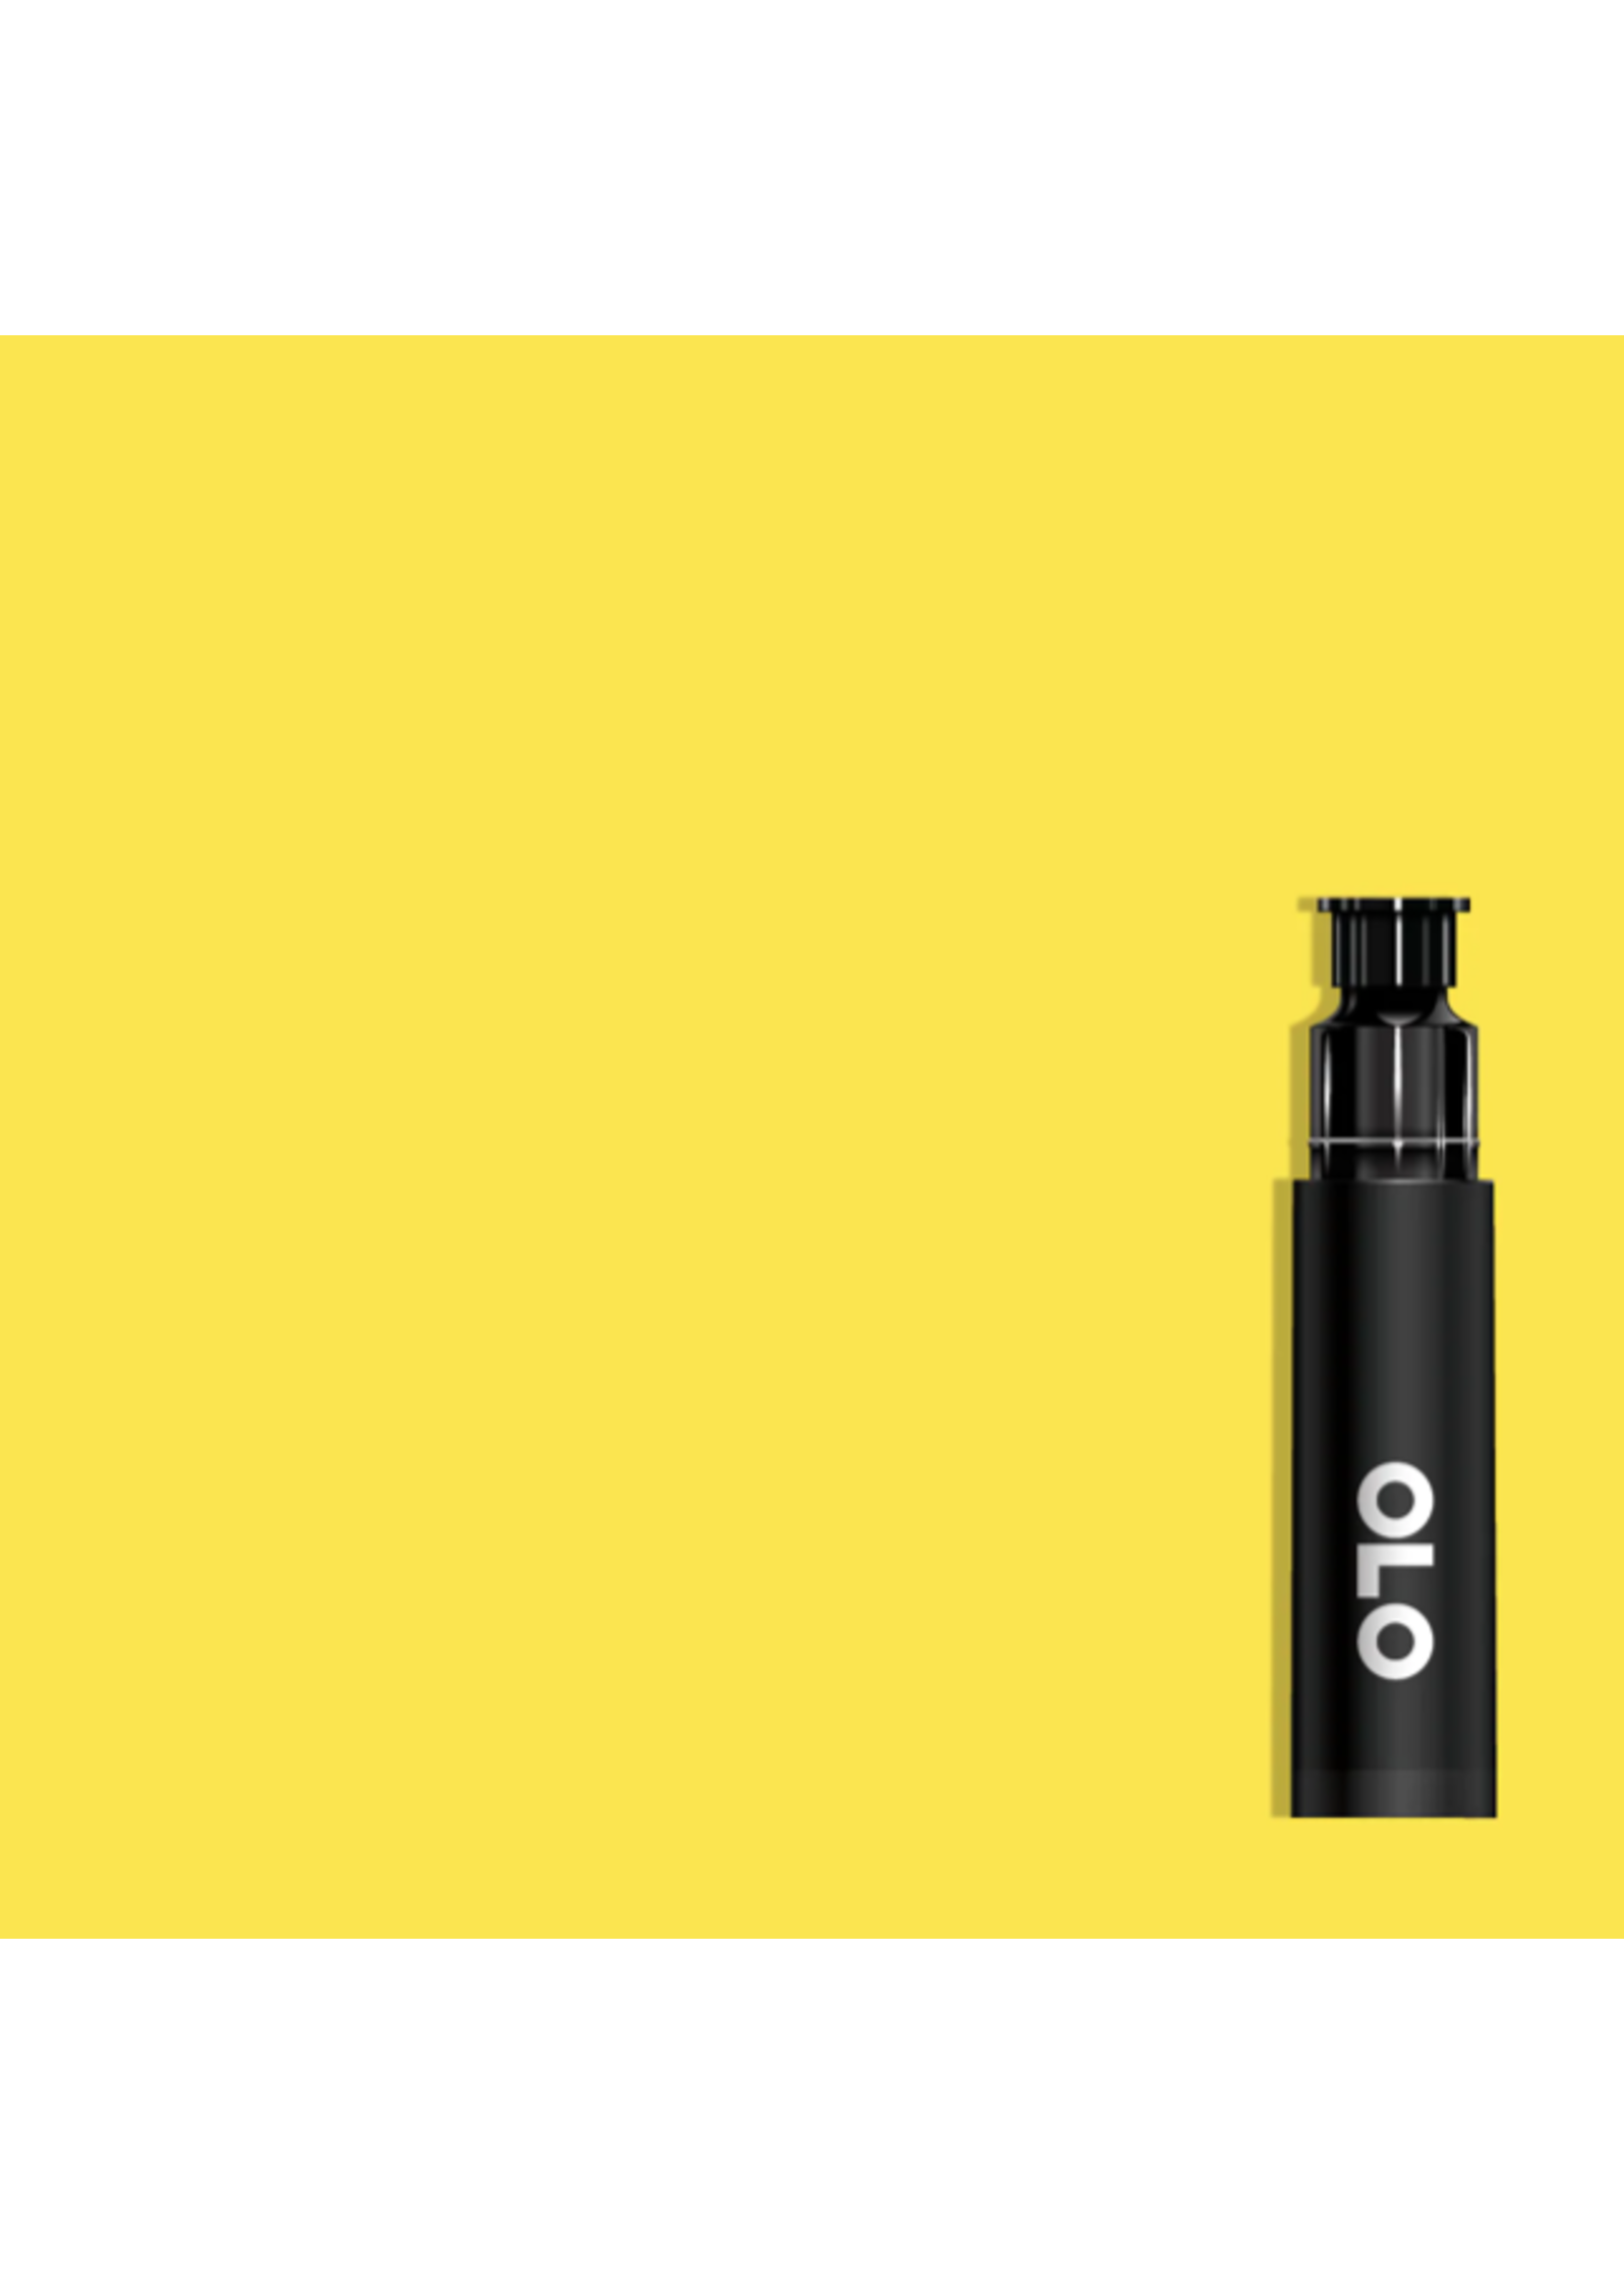 OLO OLO Brush Replacement Cartridge: Buttercup